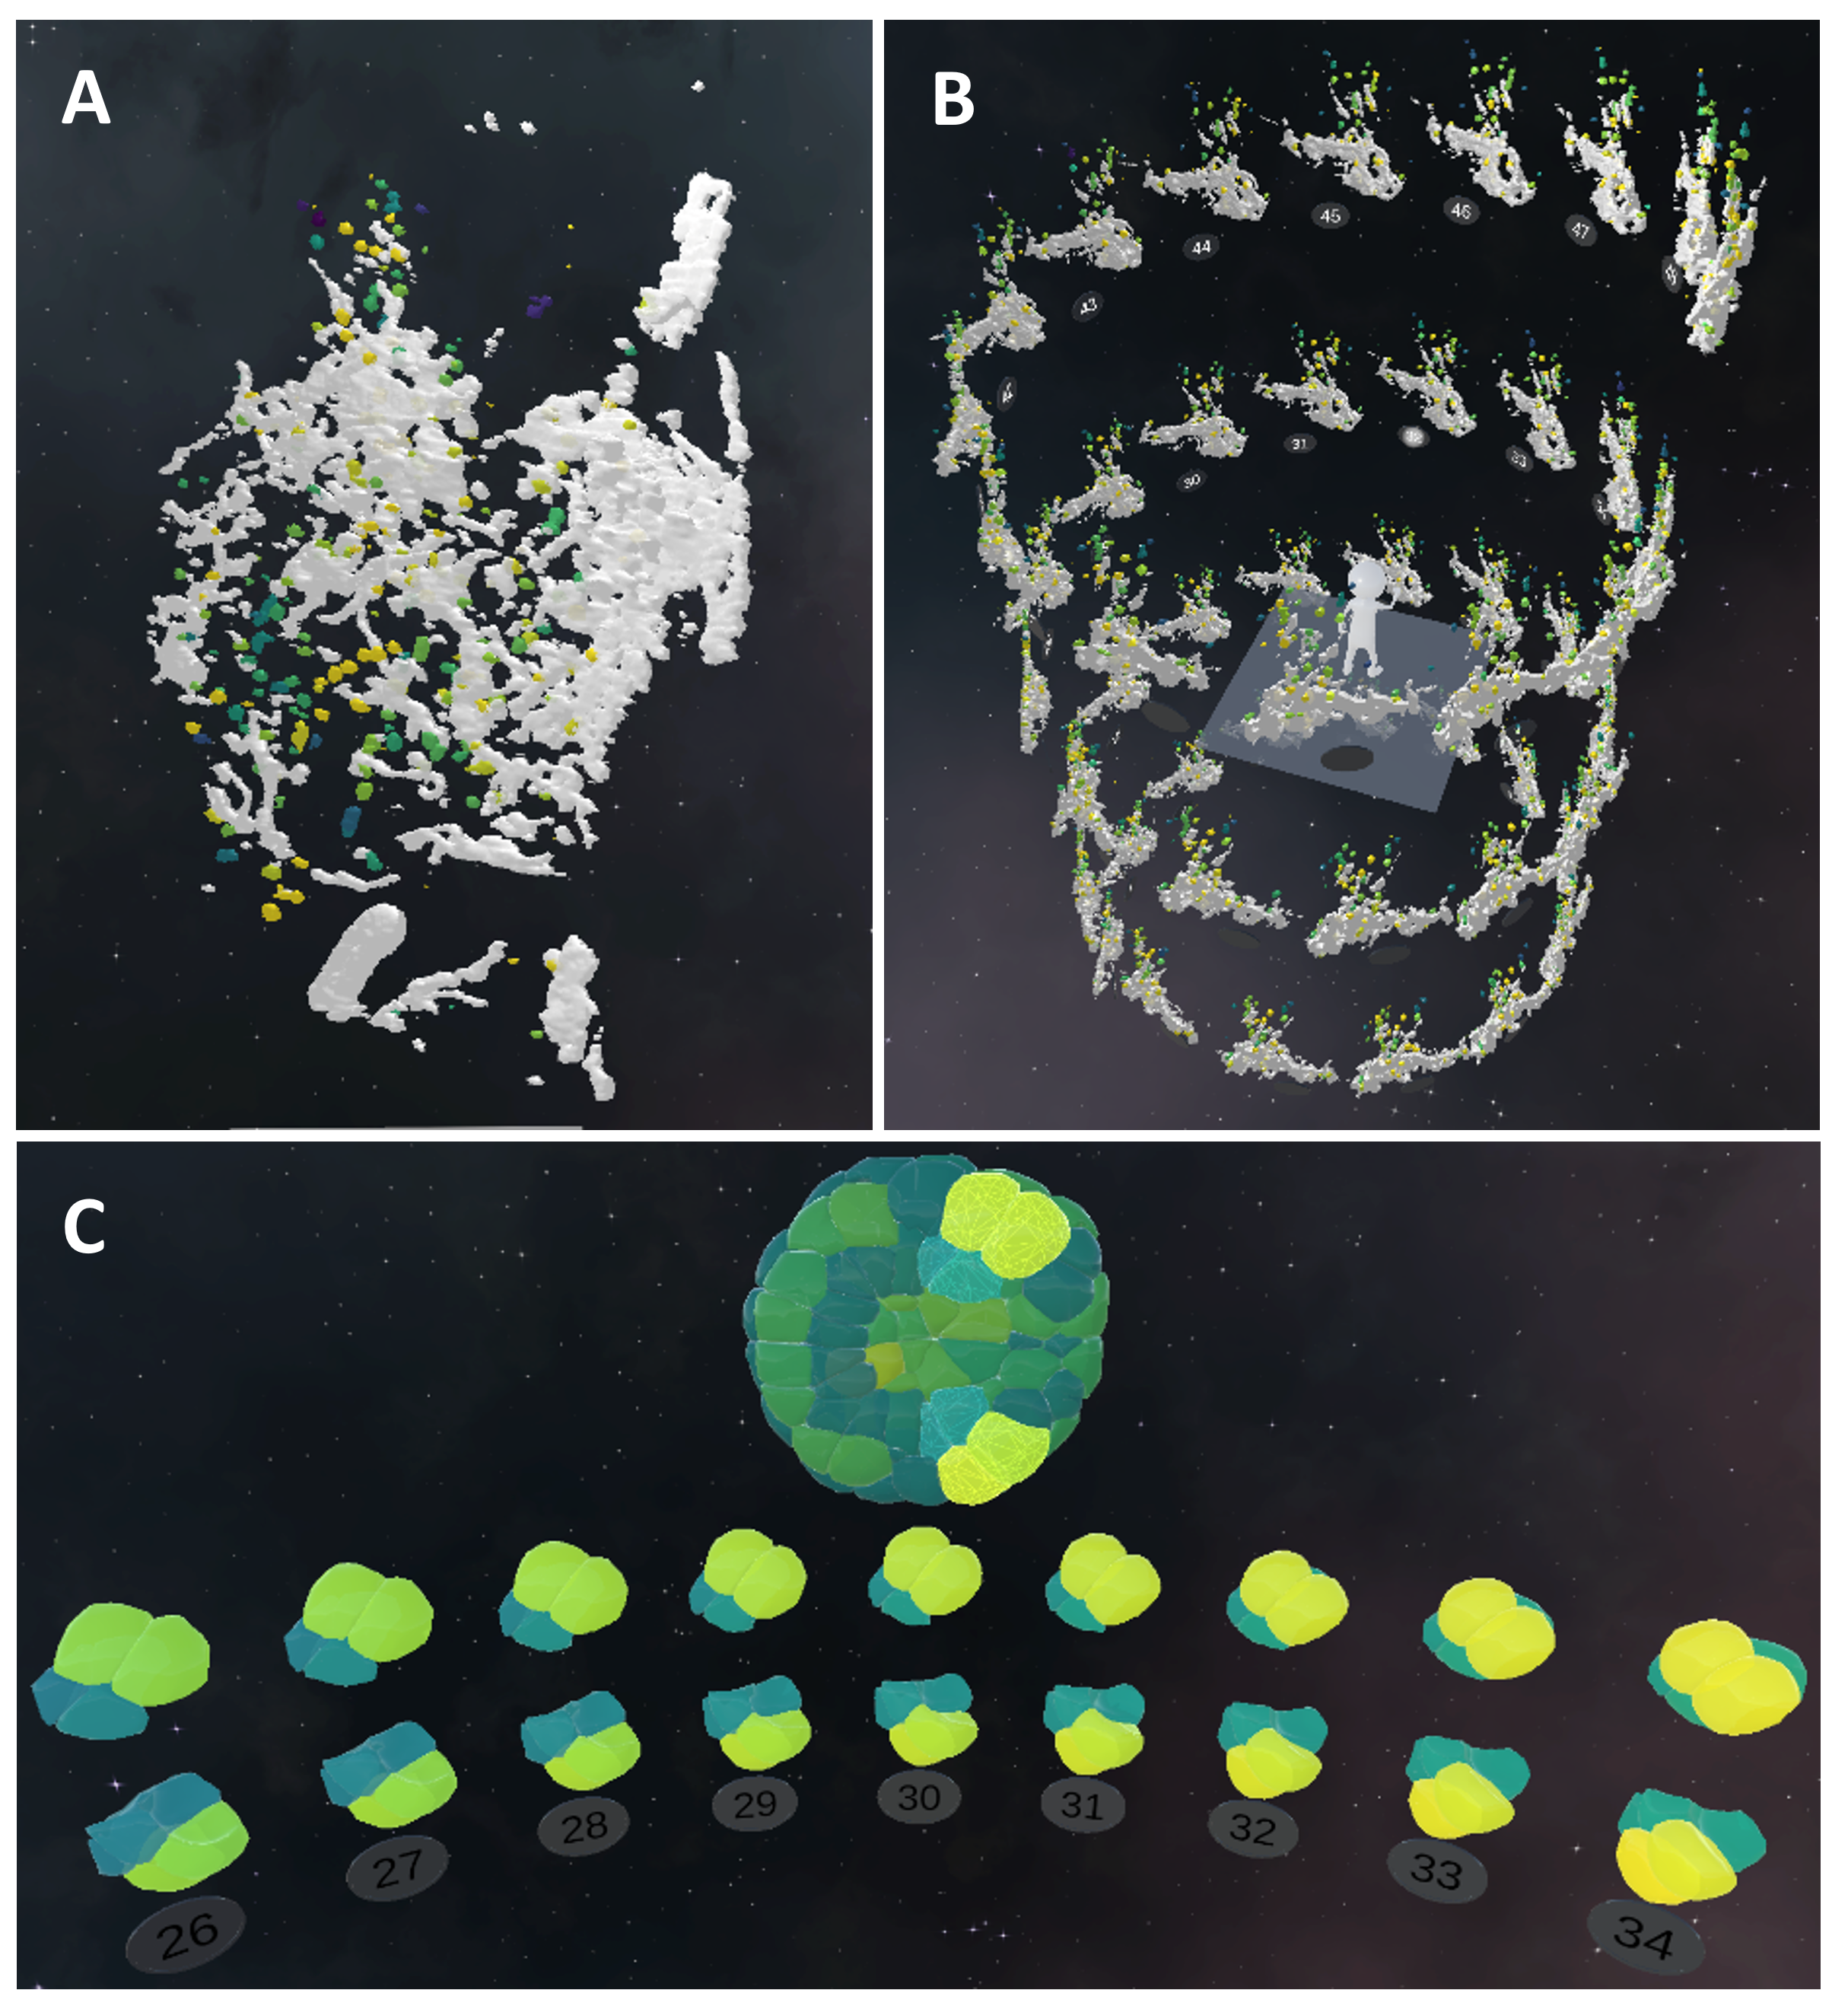 3D Timeline visualization in VR for 3D temporal microscopy images. (A) 3D view of CD63 endosomes (green-yellow) versus mitochondria (grey) in RPE1 cells. (B) Helicoid 3D timeline visualization of the temporal evolution of a selected region of interest in the cell. (C) 3D view of Phallusia Mammillata embryo recording, with a curved 3D timelime visualization of the temporal evolution of the highlighted cells.